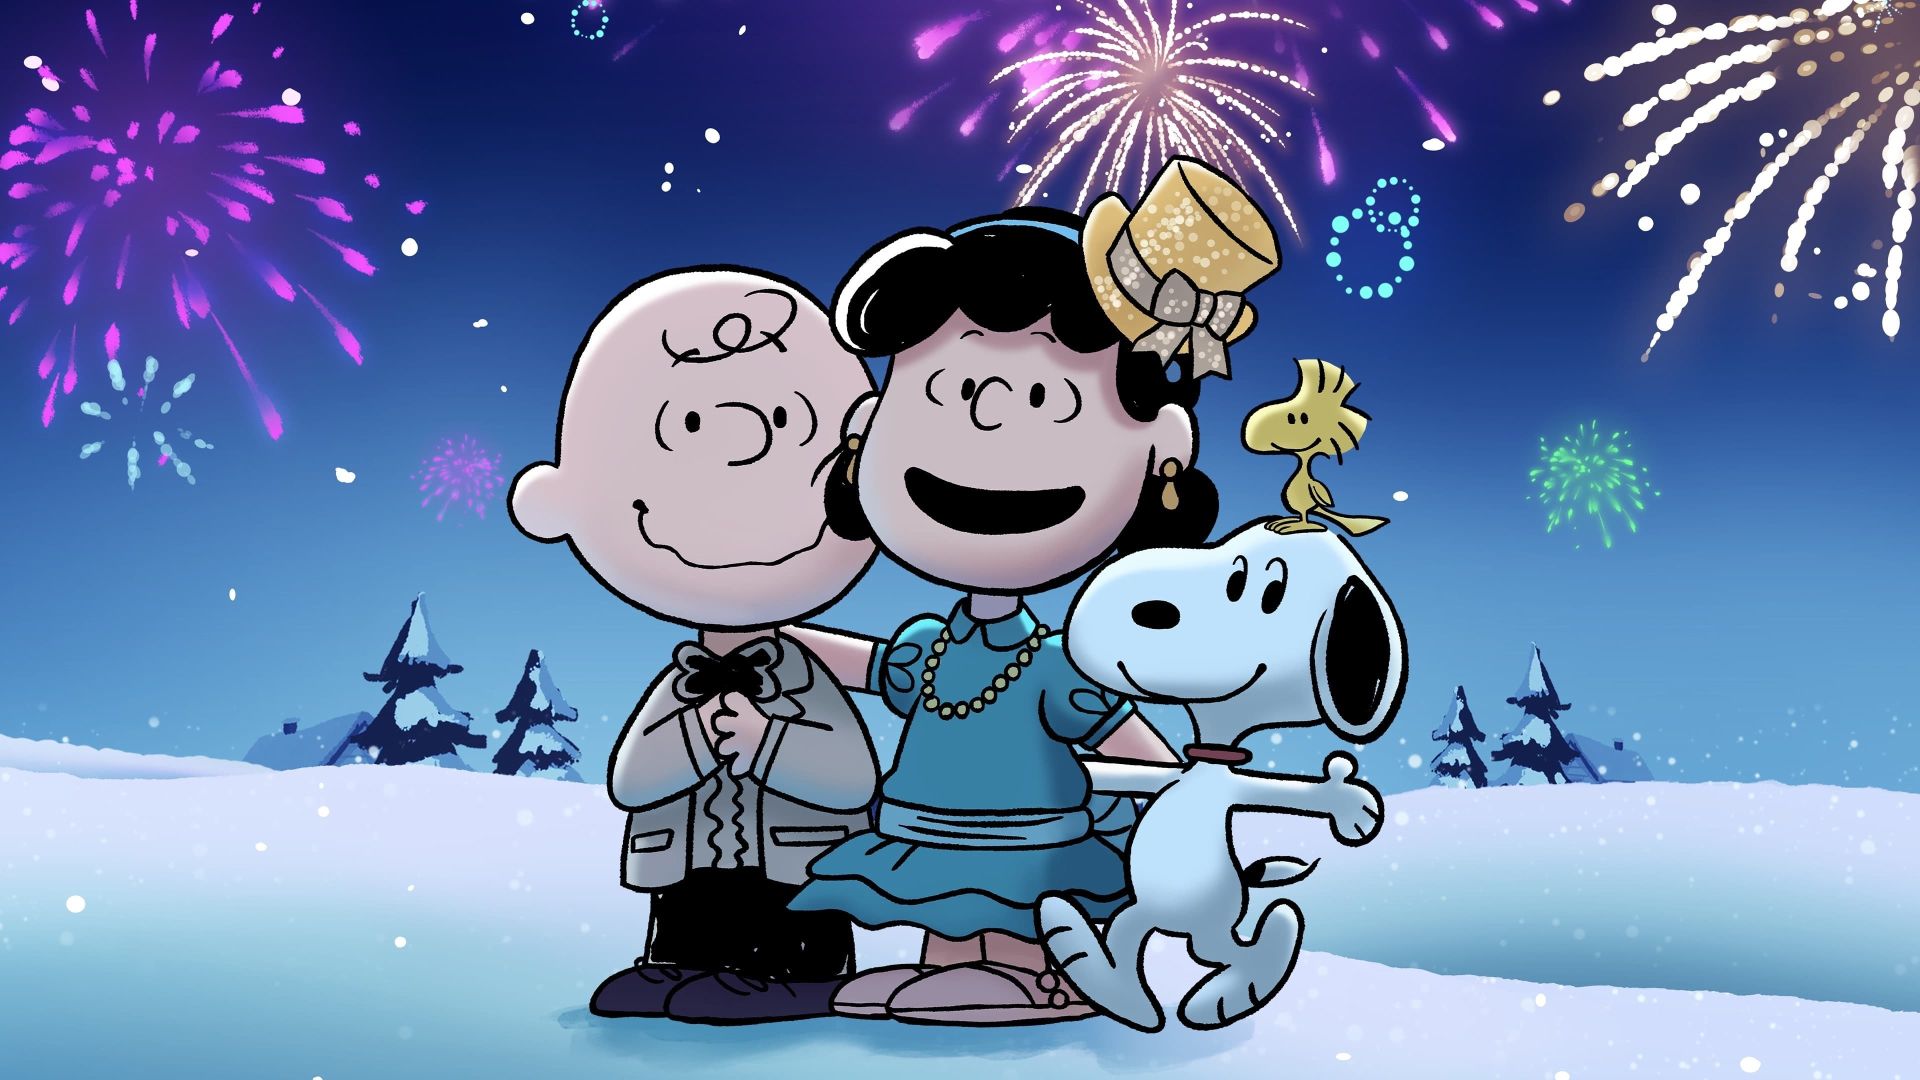 Snoopy Presents: For Auld Lang Syne background